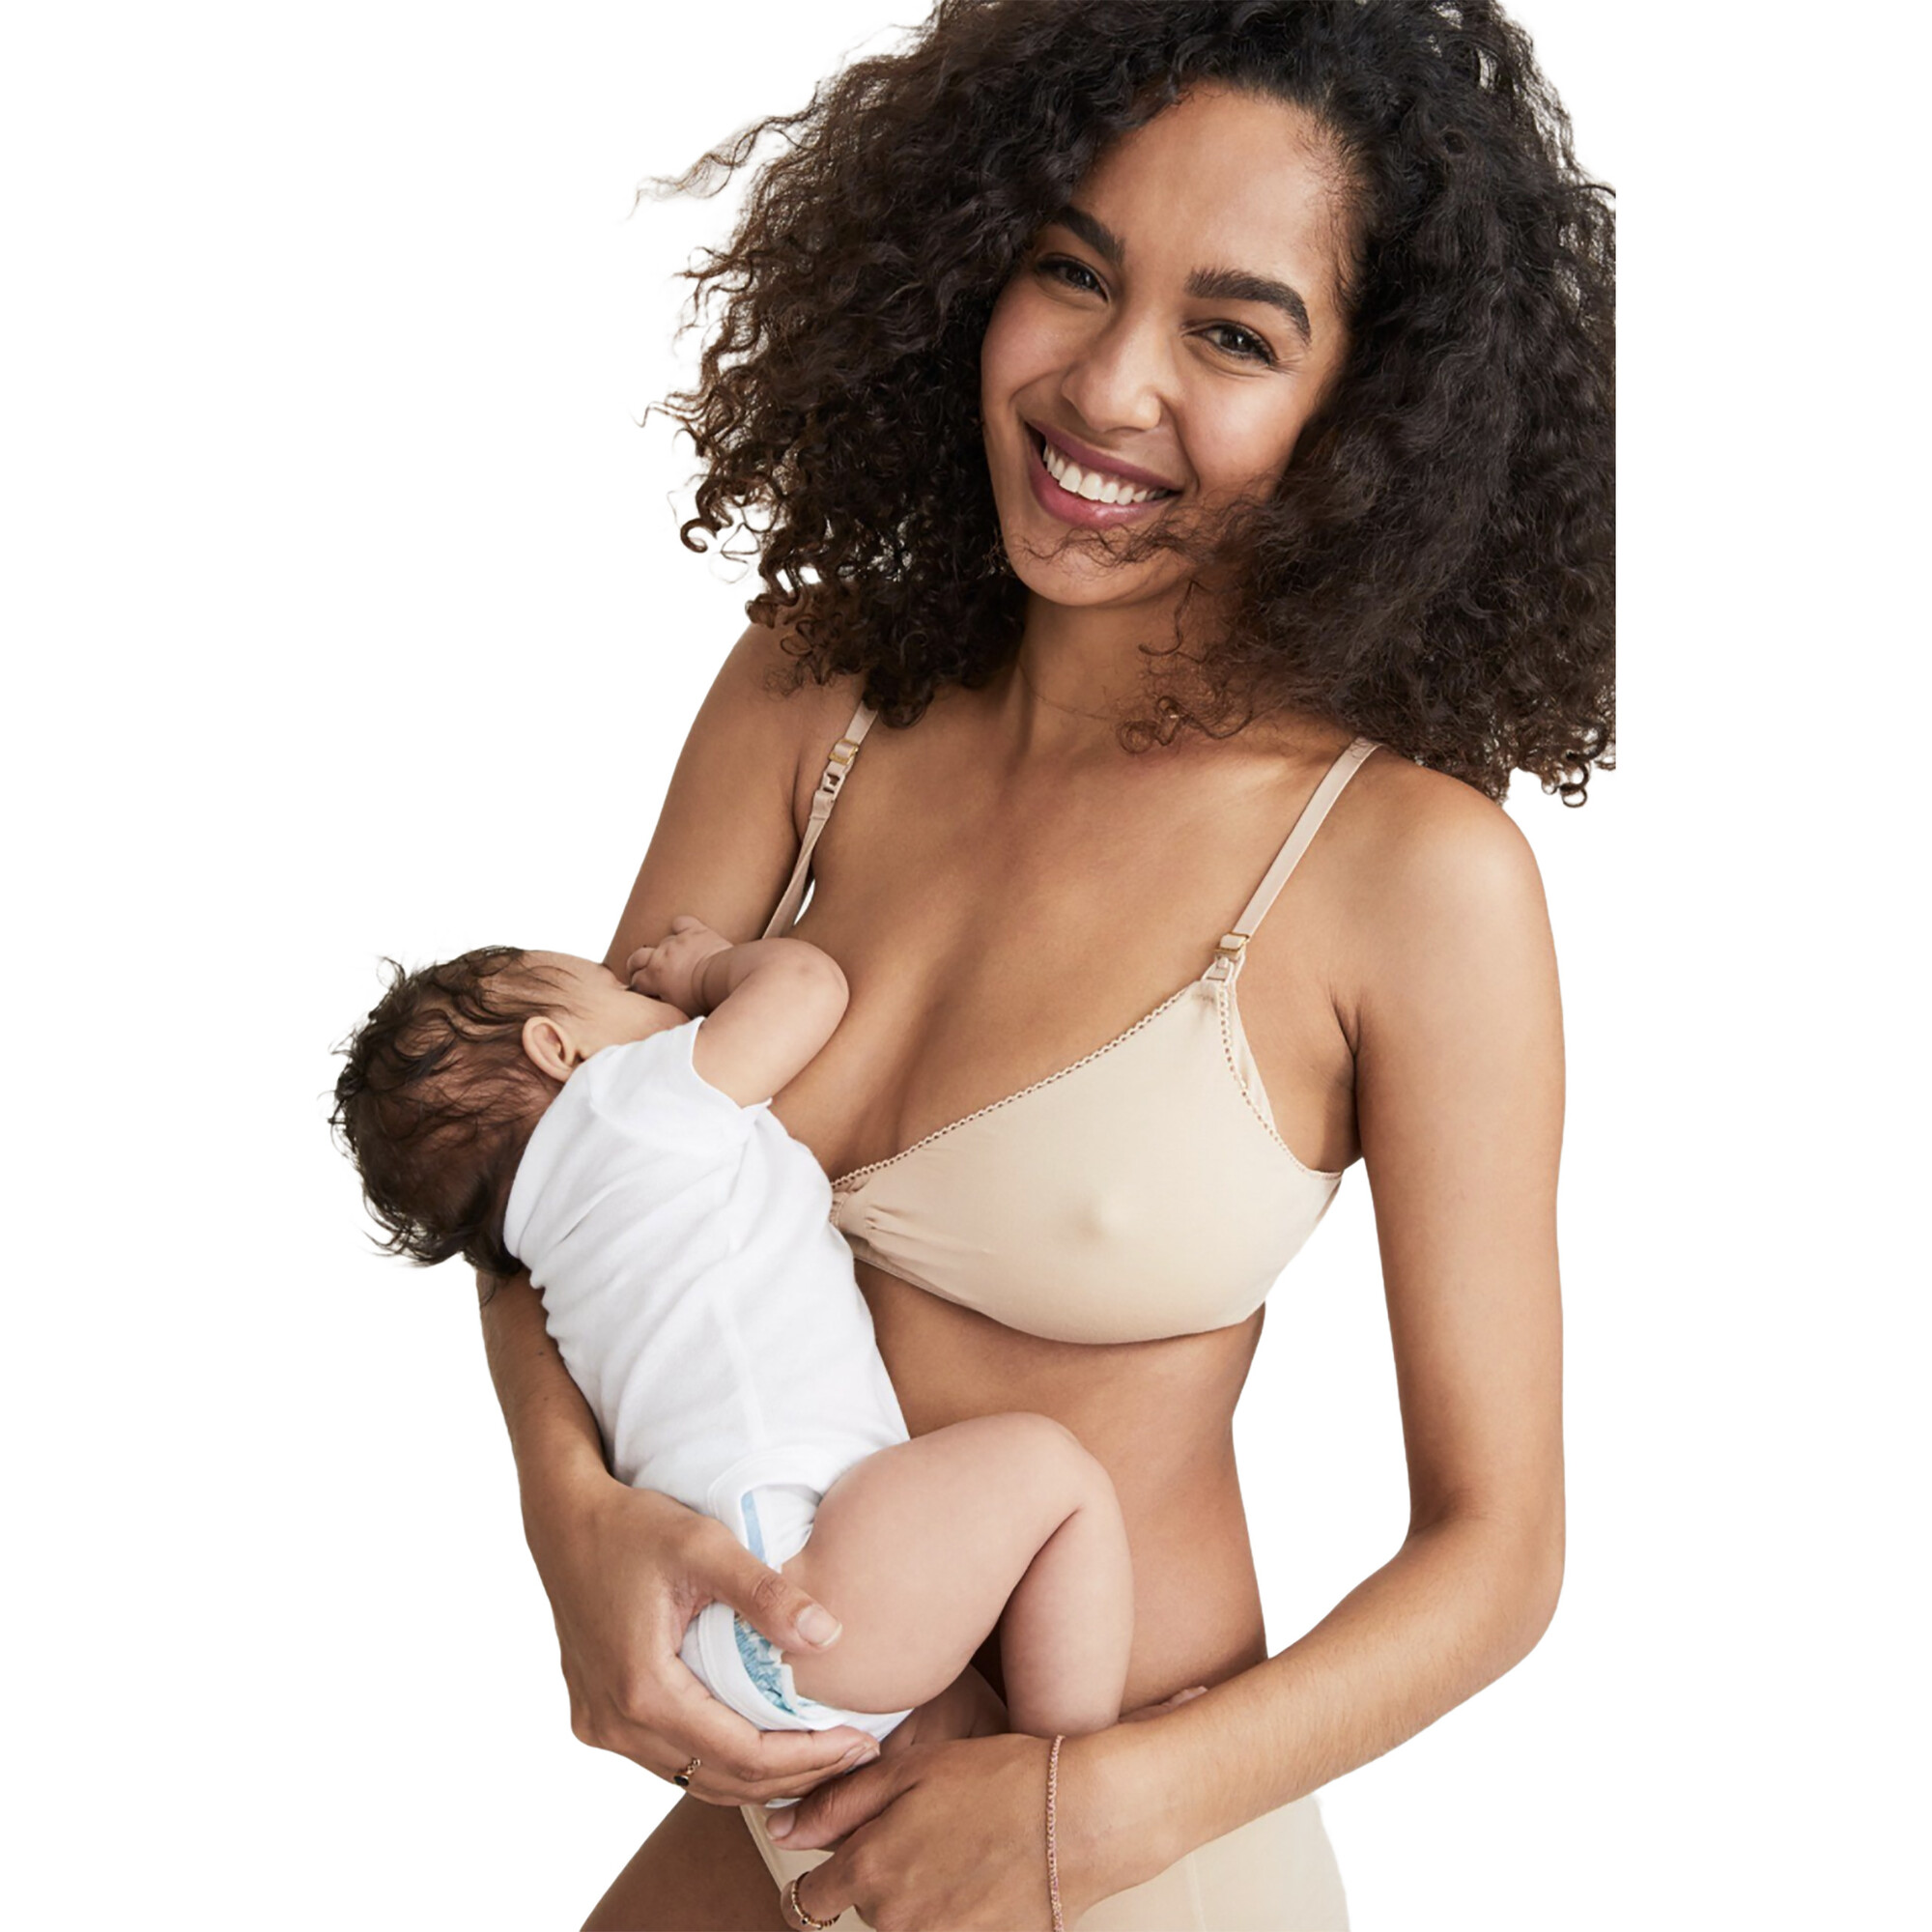  BETH'S MARKET PLACE Nursing Bras for Breastfeeding, Seamless  Comfort Clip Down Pregnancy & Maternity Bra for Women, Adjustable and Fits  to The Body's Contour, Everyday T-Shirt Bra Underwear